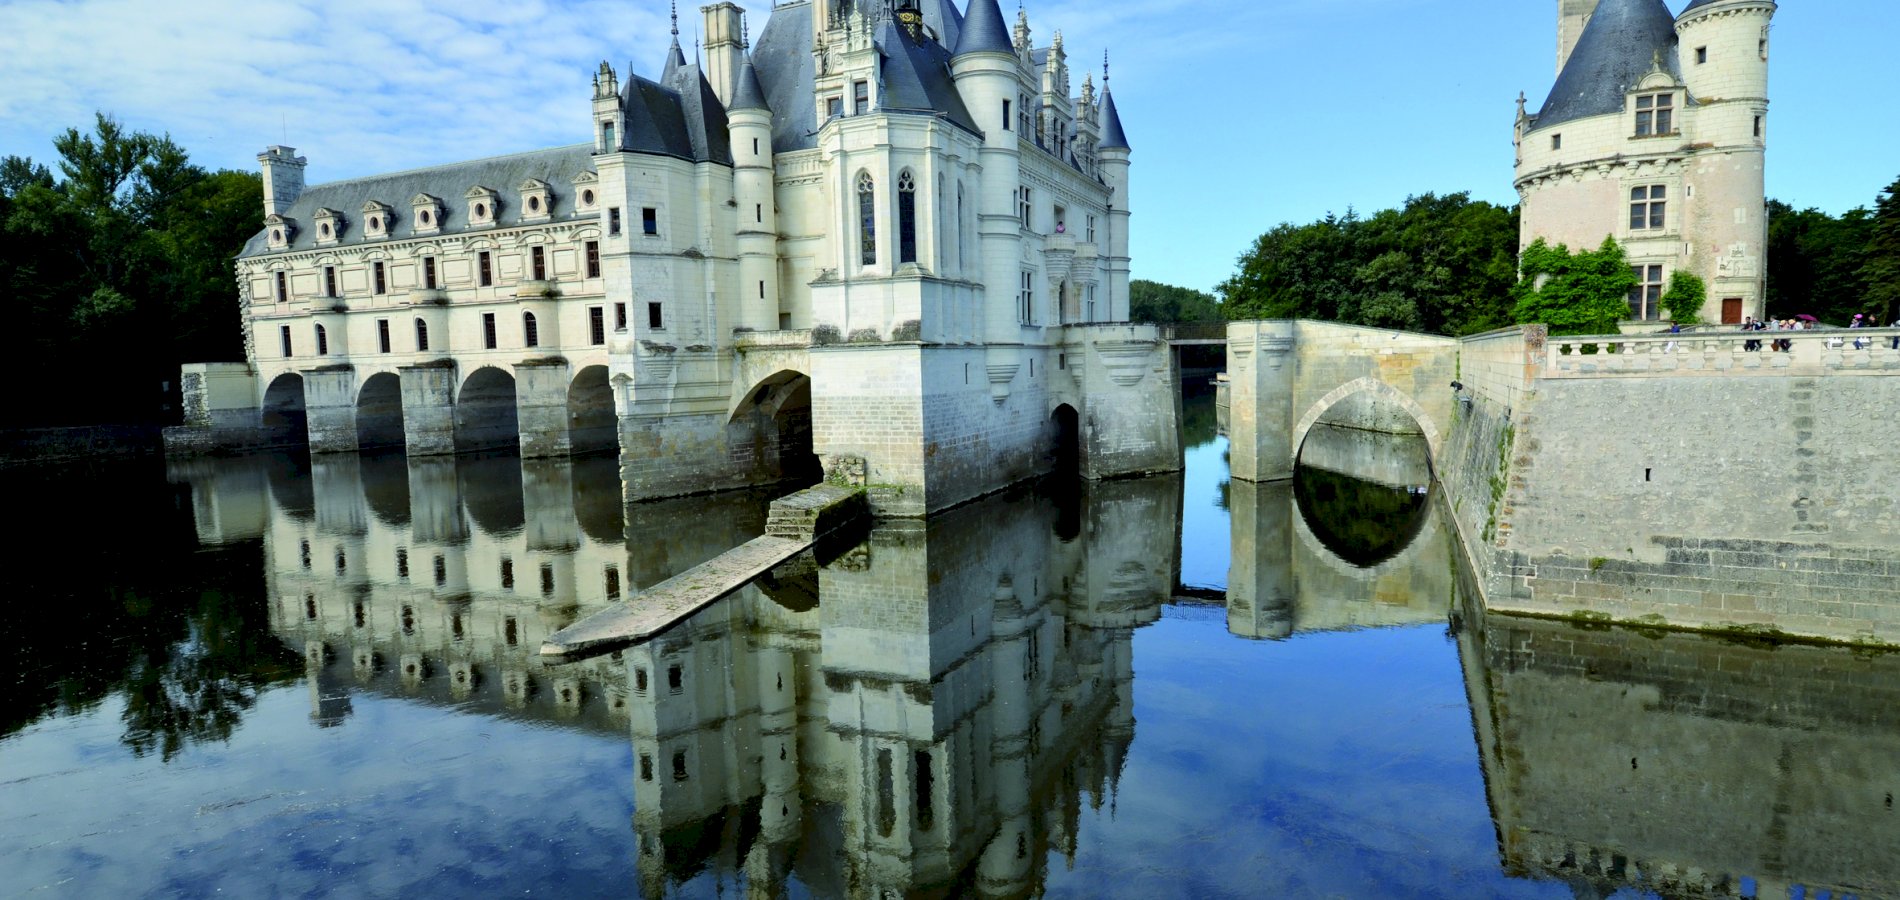 Ophorus Tours - 9 Days Small Group Normandy, Loire Valley & Bordeaux Travel Package - 4* Hotel